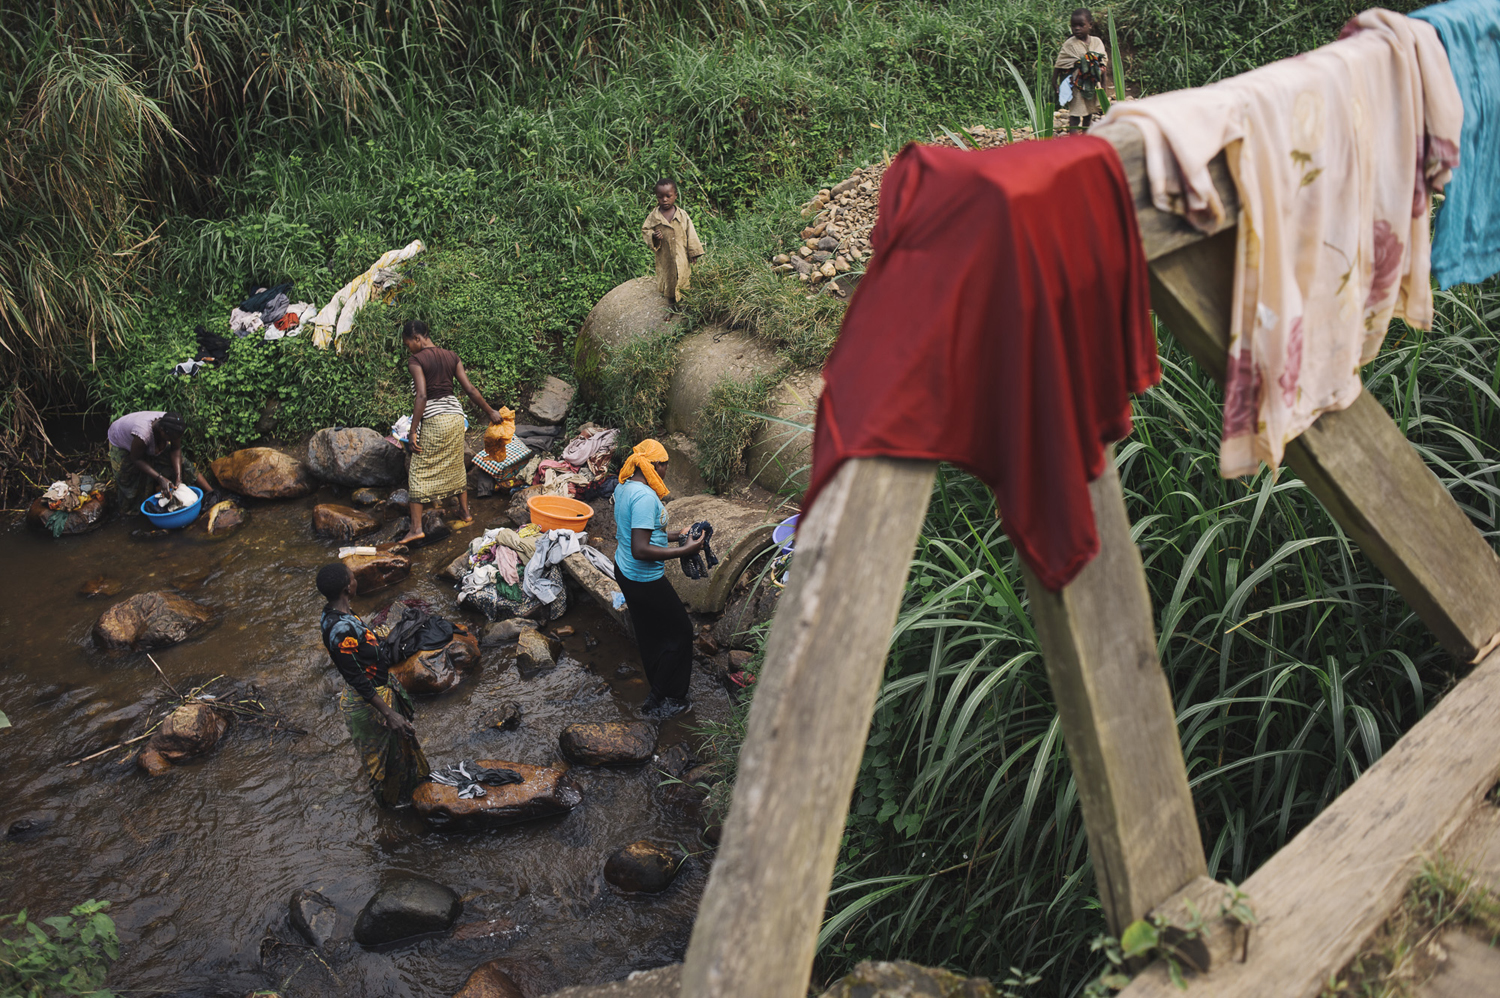 Ladies wash clothes in the river flowing through the town of Nyabiondo in eastern Congo, July 23, 2014.